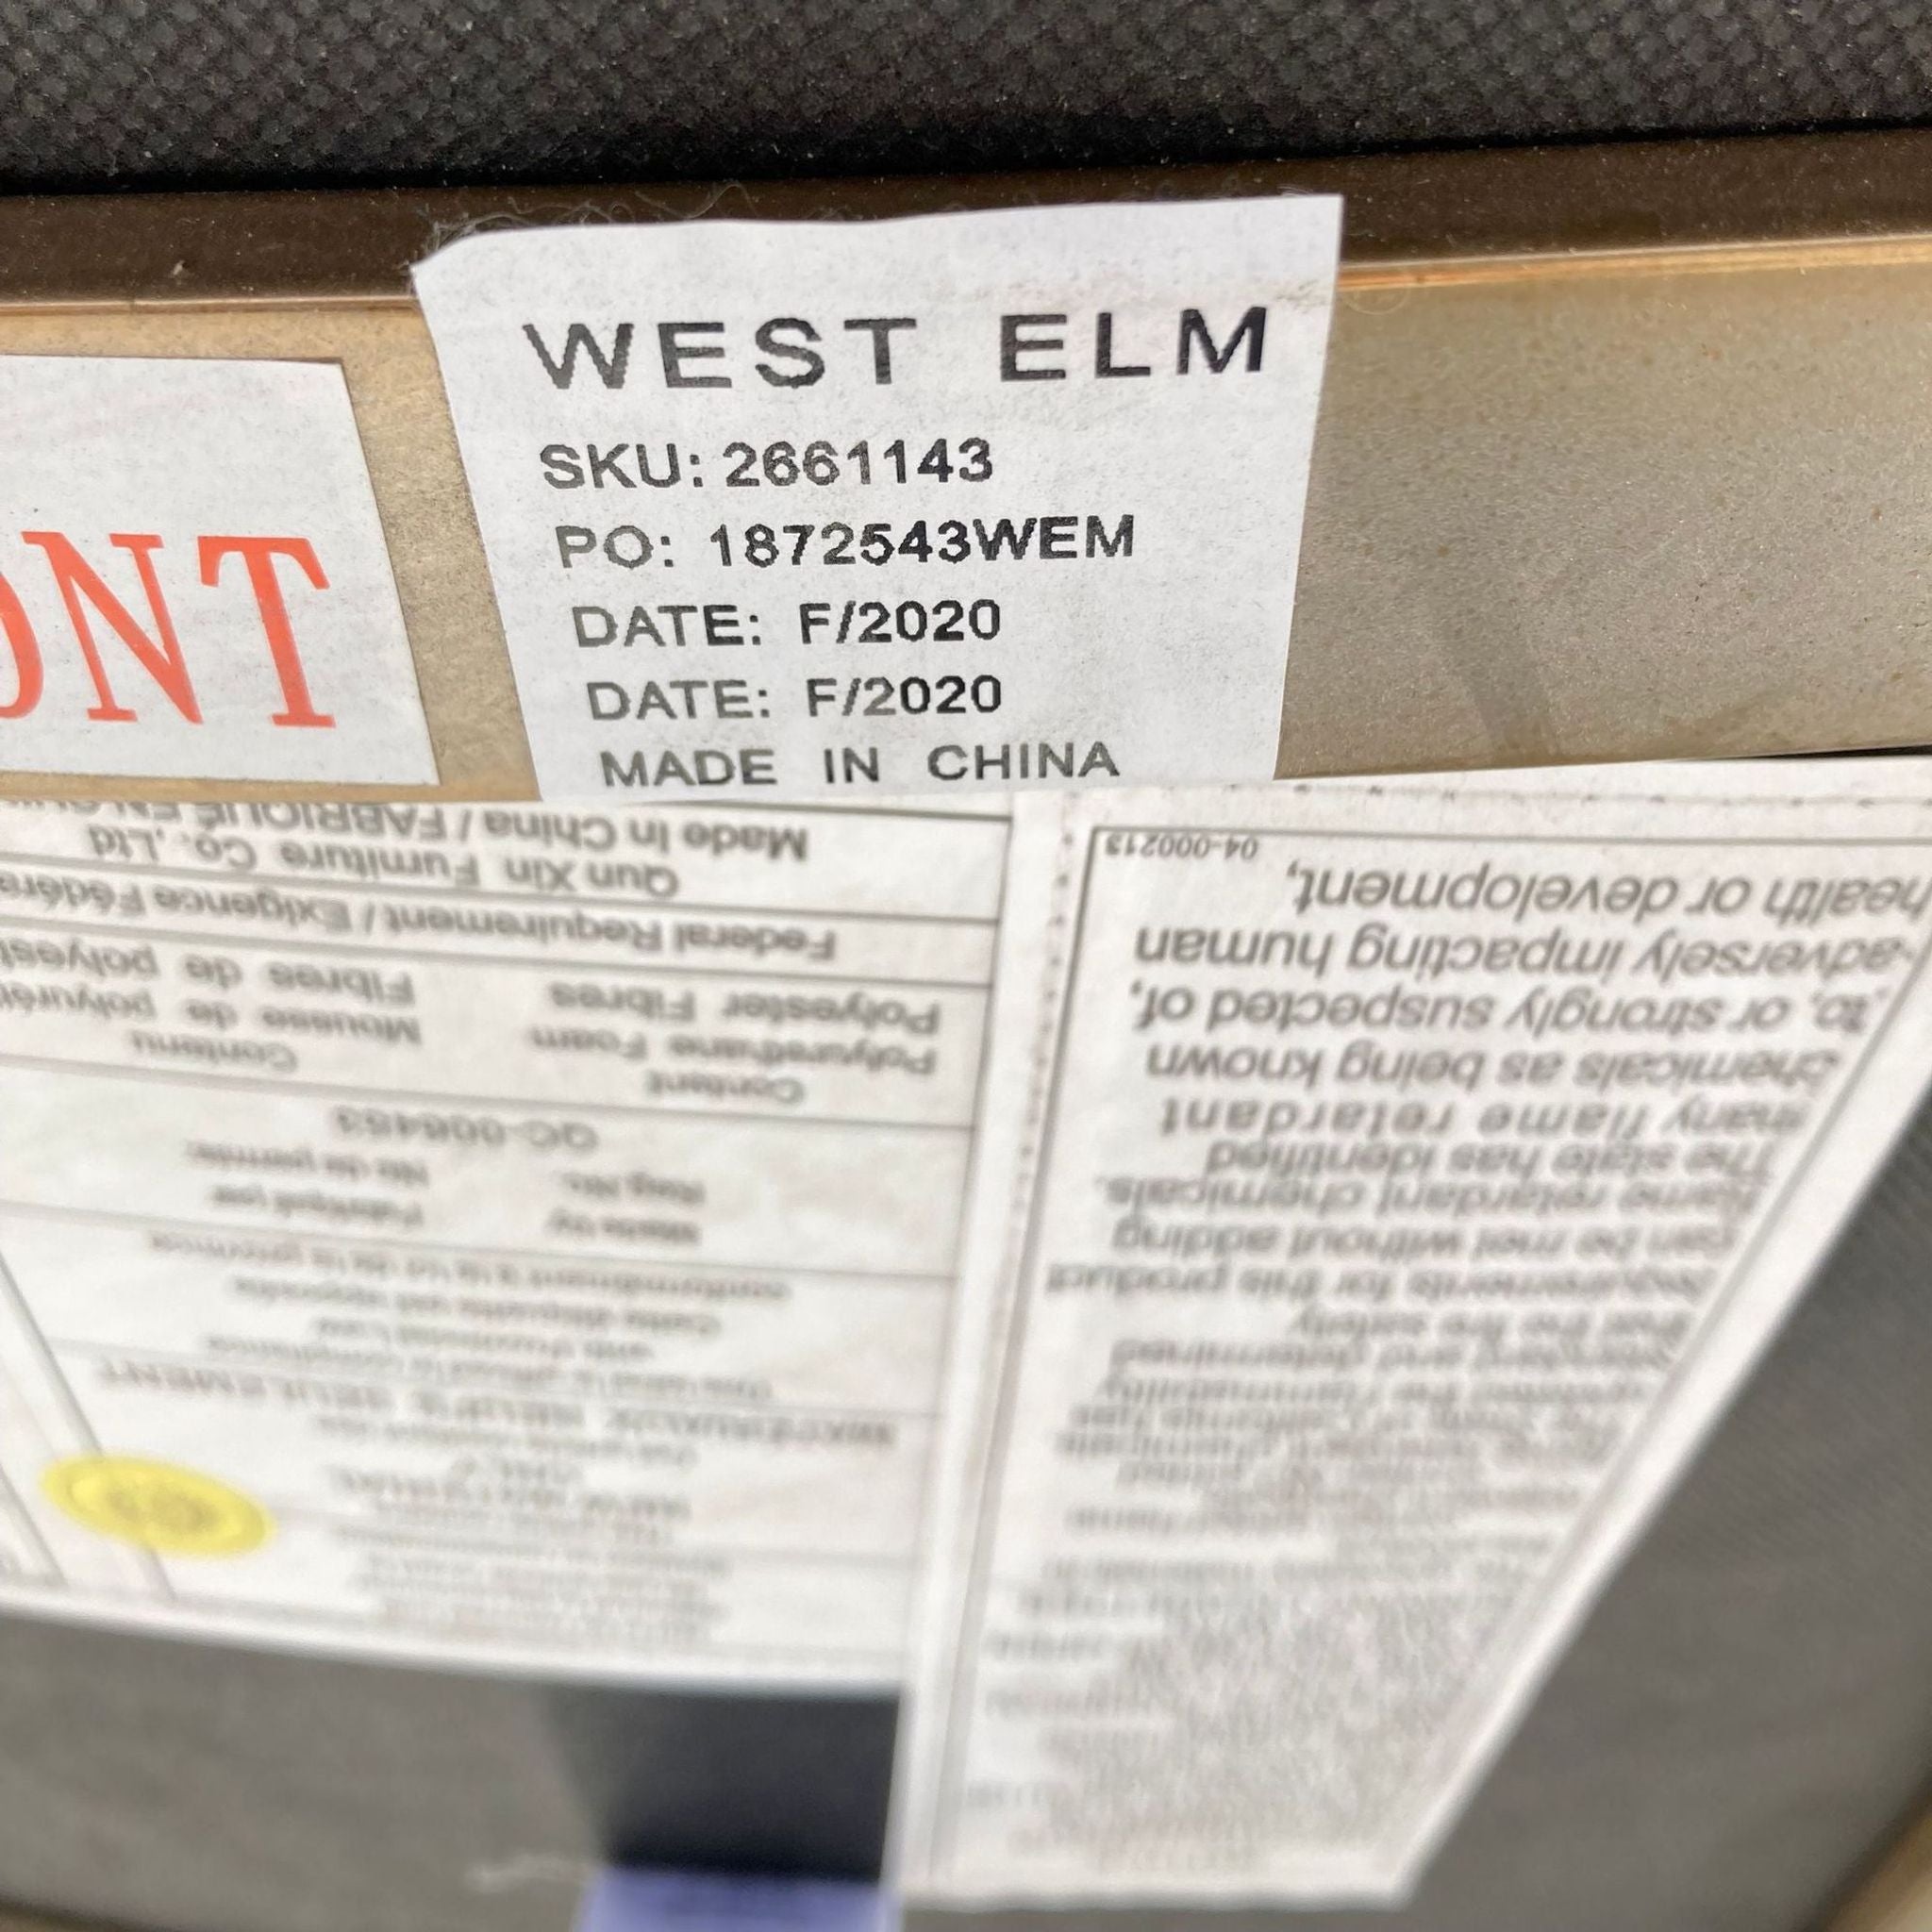 Label showing the West Elm brand, SKU, and manufacture details on a chair.